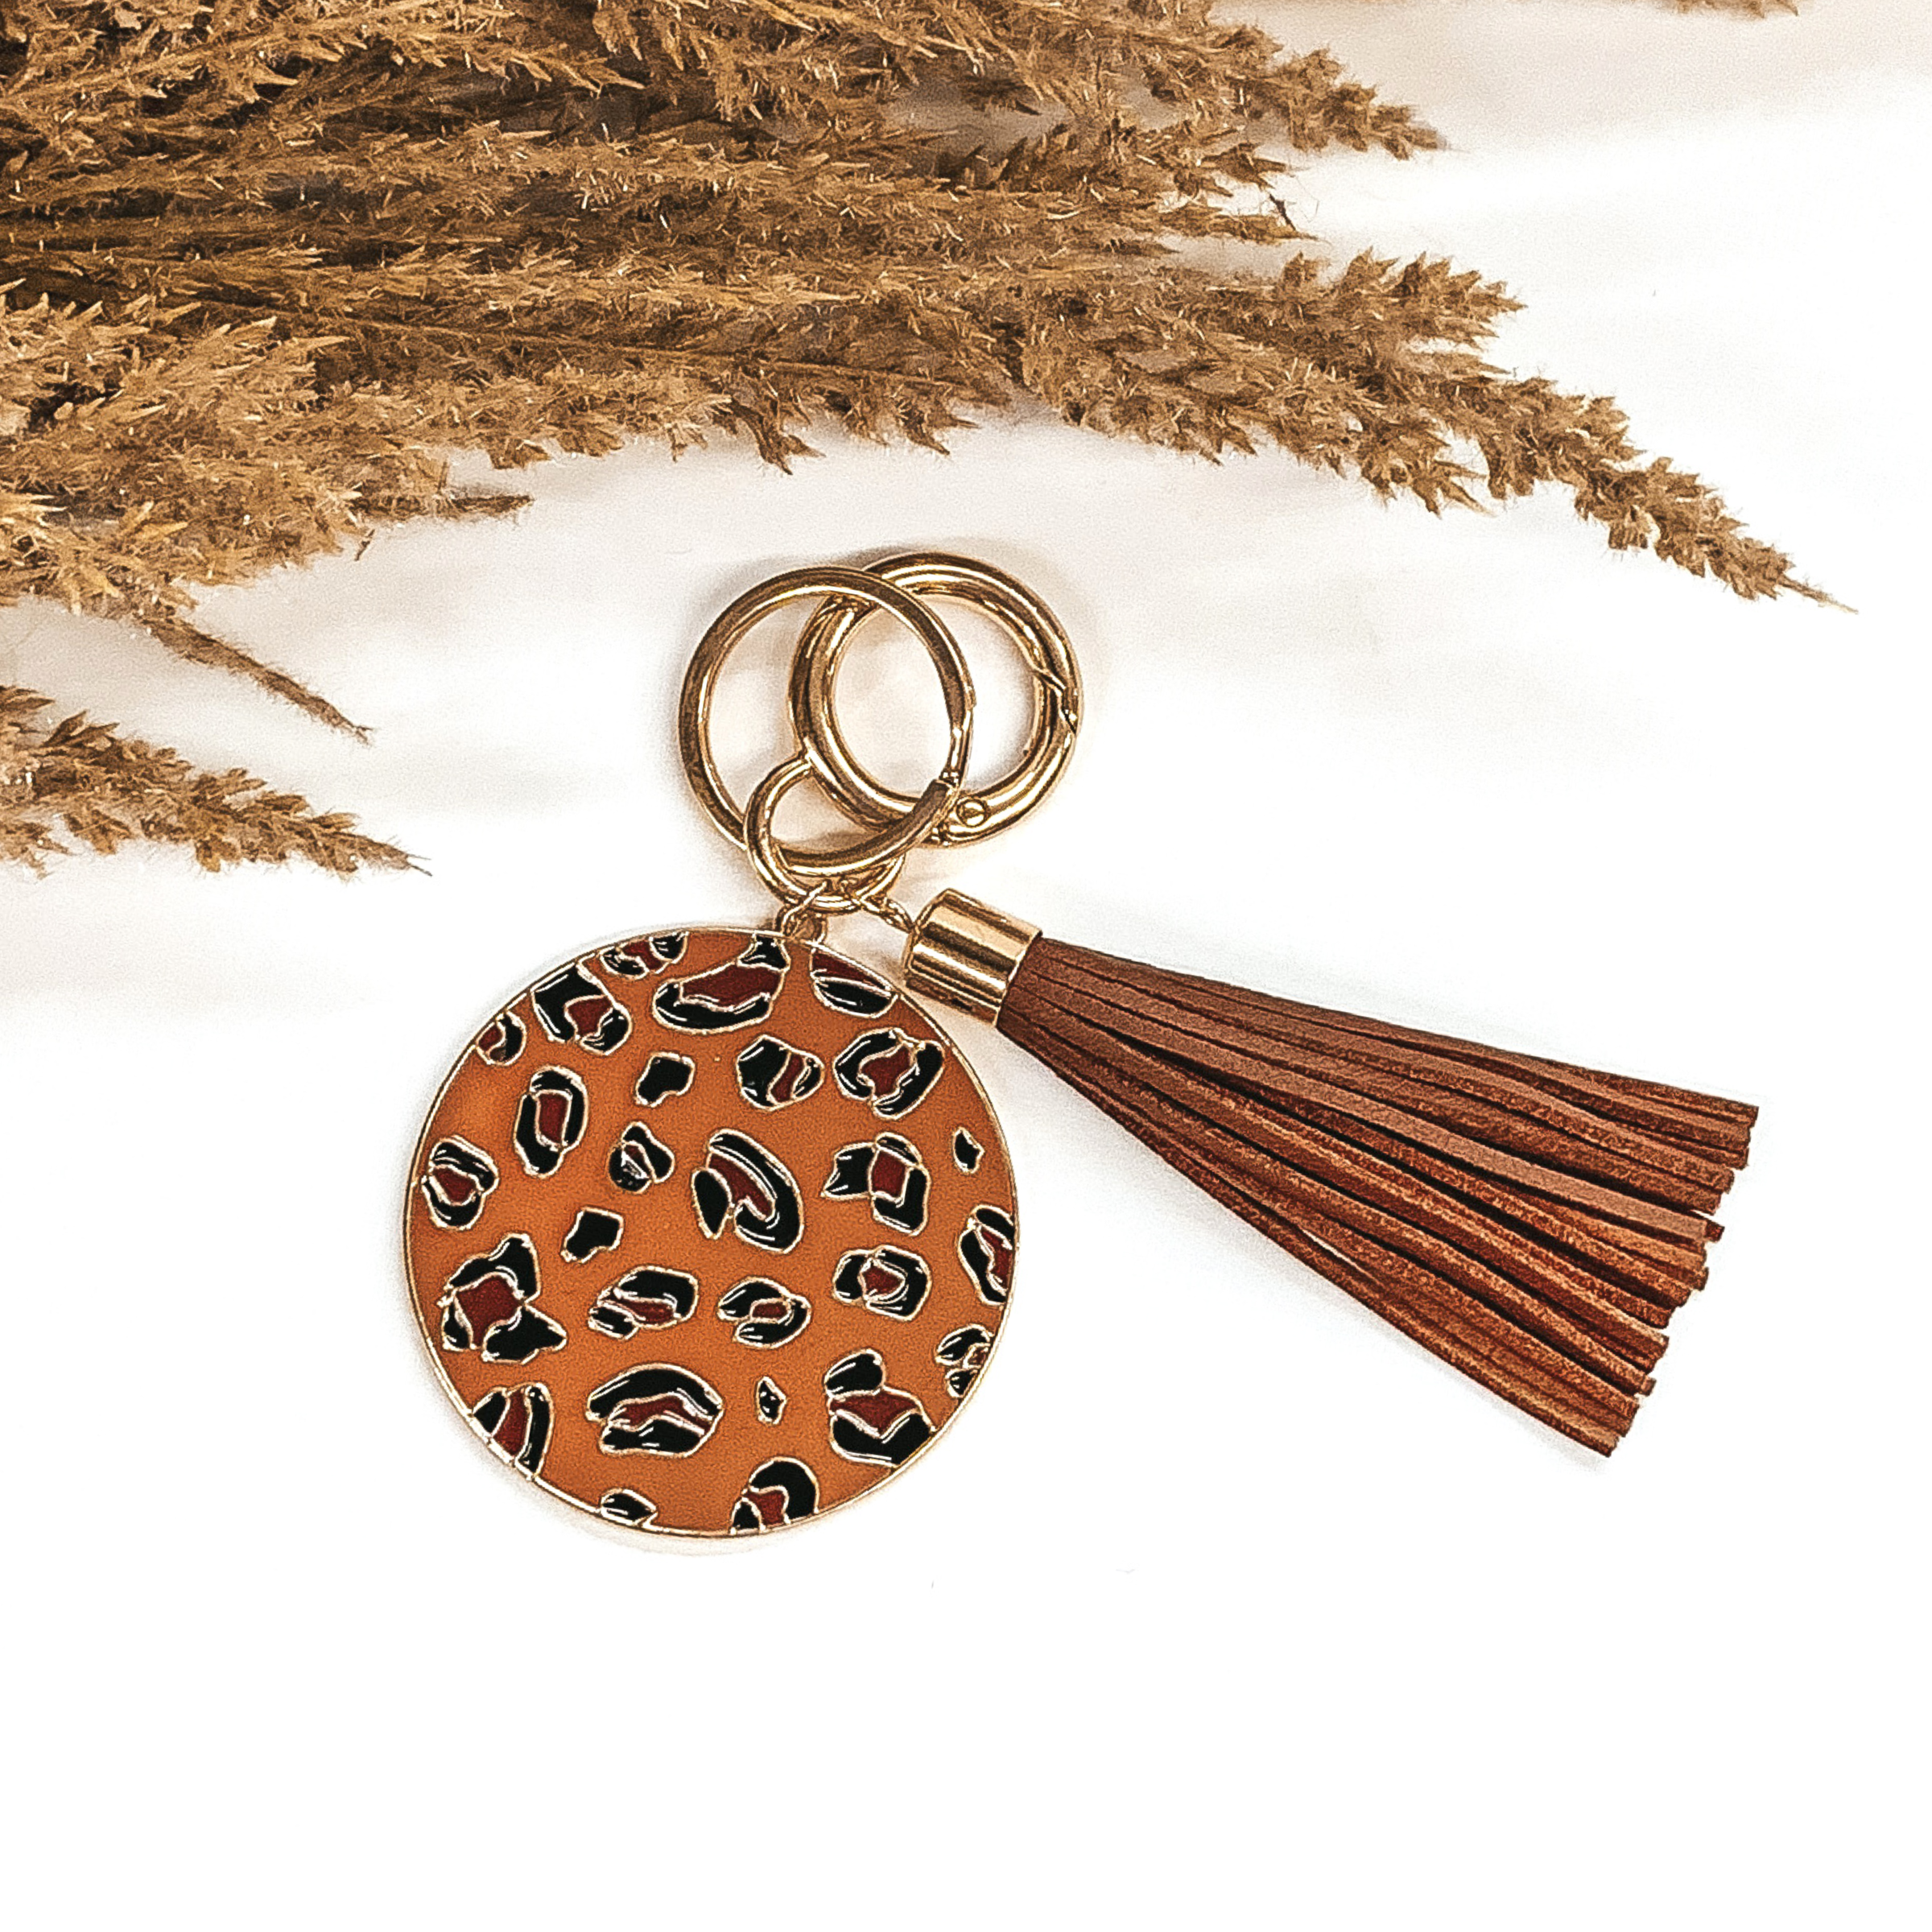 Dark tan circle key chain with a leopard print, two gold key rings, and a brown tassel. This key chain is pictured laying on a white background with some brown floral at the top of the picture.